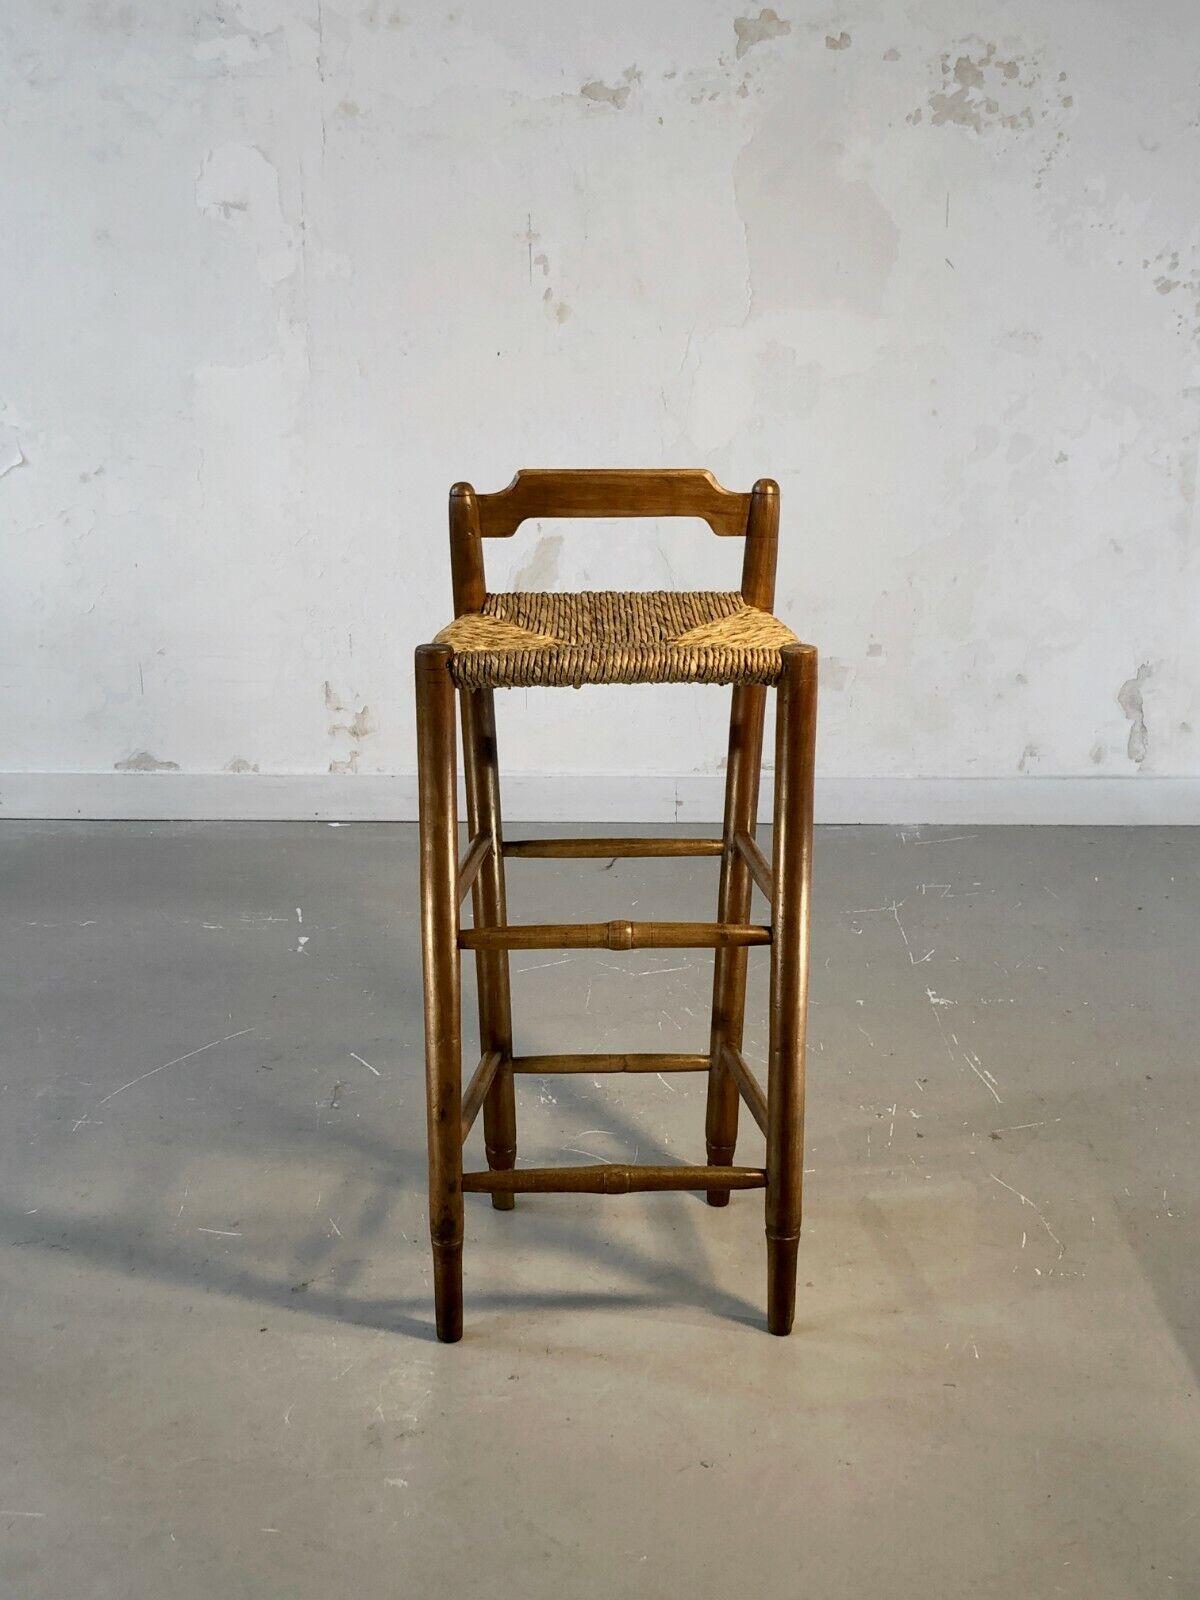 A BRUTALIST MID-CENTURY-MODERN RUSTIC BAR STOOL CHAIR, France 1950 For Sale 8